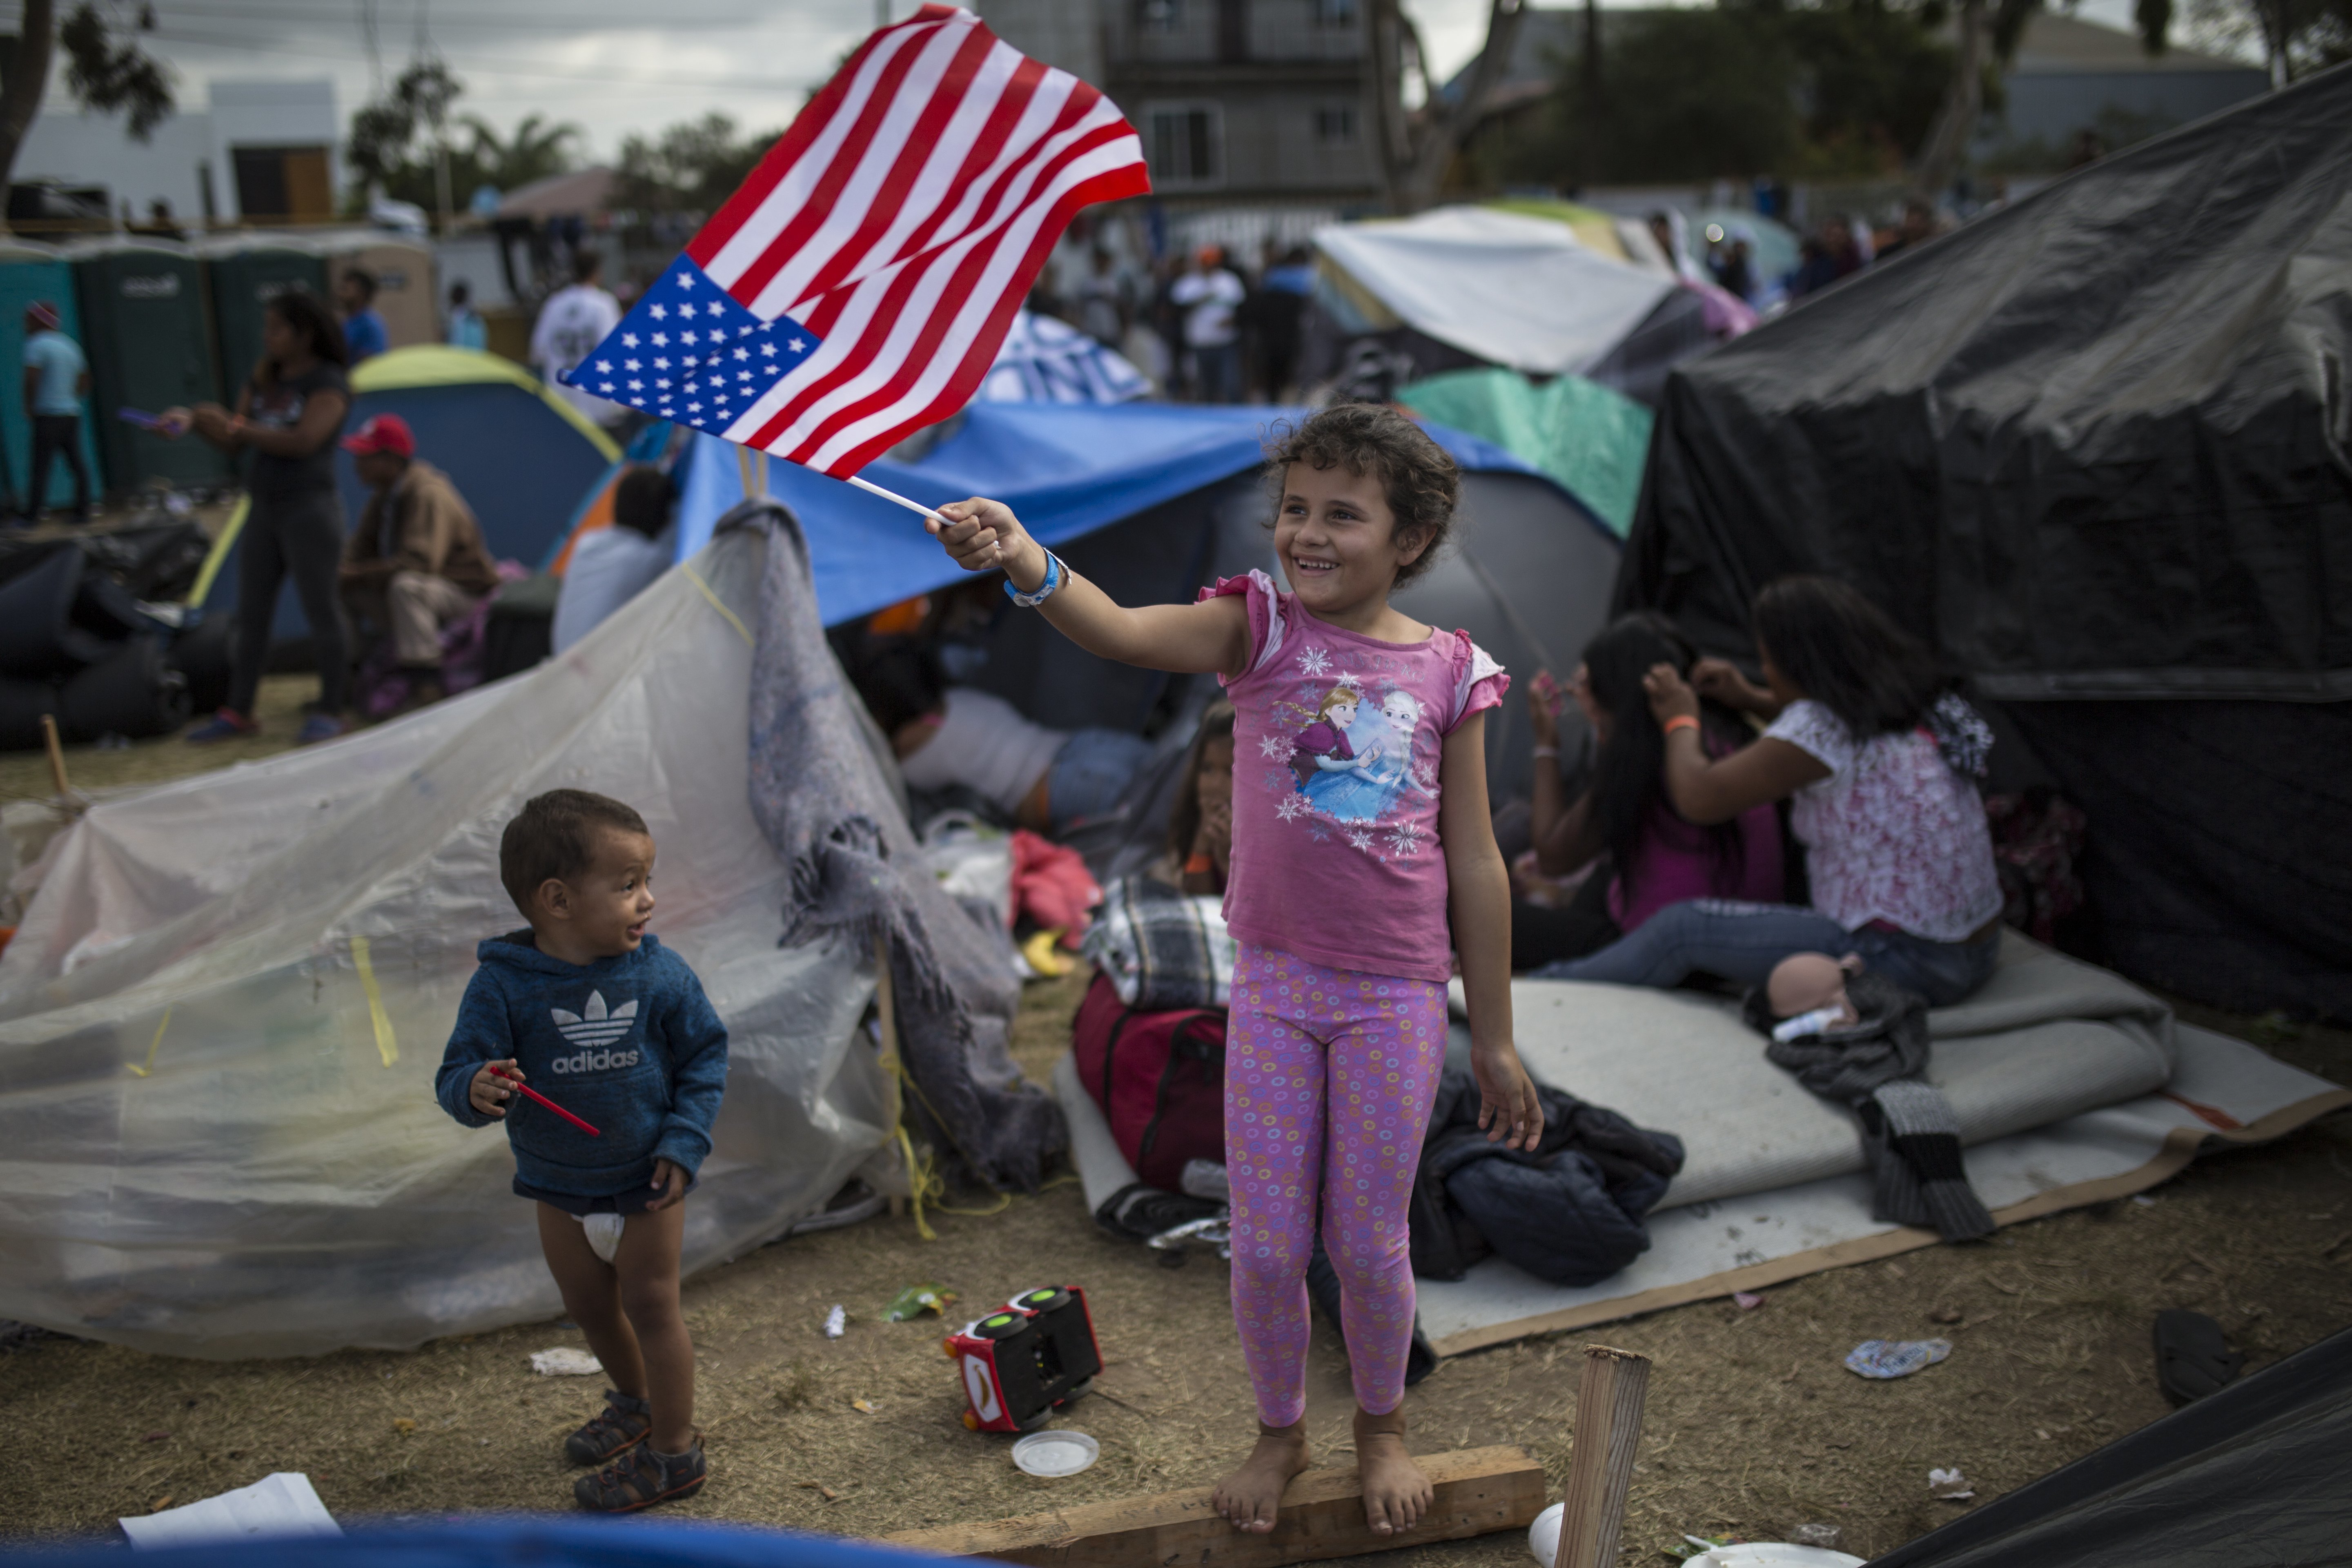 Seven-year-old Honduran migrant Genesis Belen Mejia Flores waves an American flag near the Benito Juarez Sports Center serving as a temporary shelter for Central American migrants, in Tijuana, Mexico.